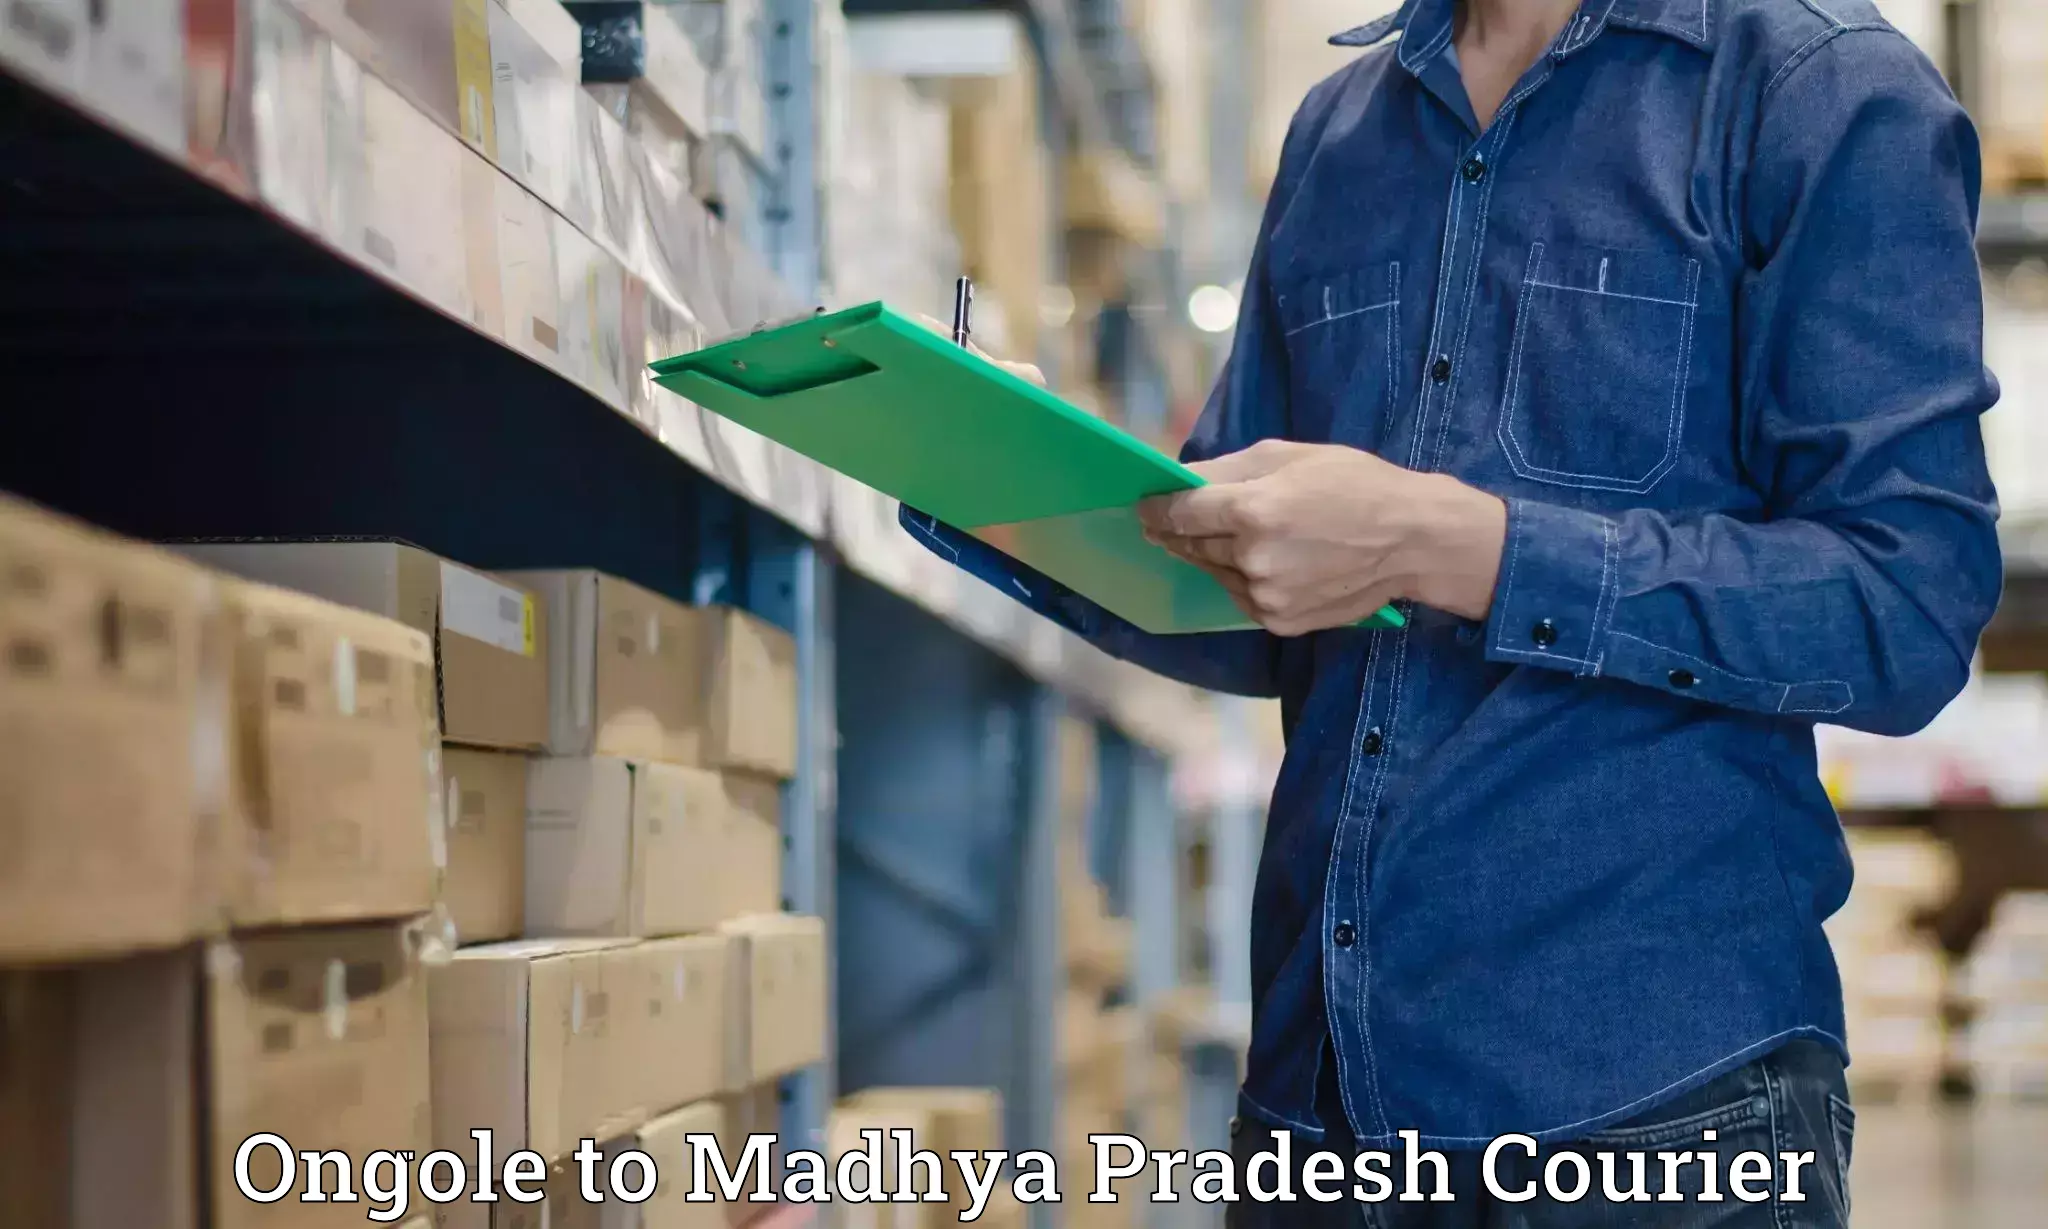 On-call courier service Ongole to Jhunku